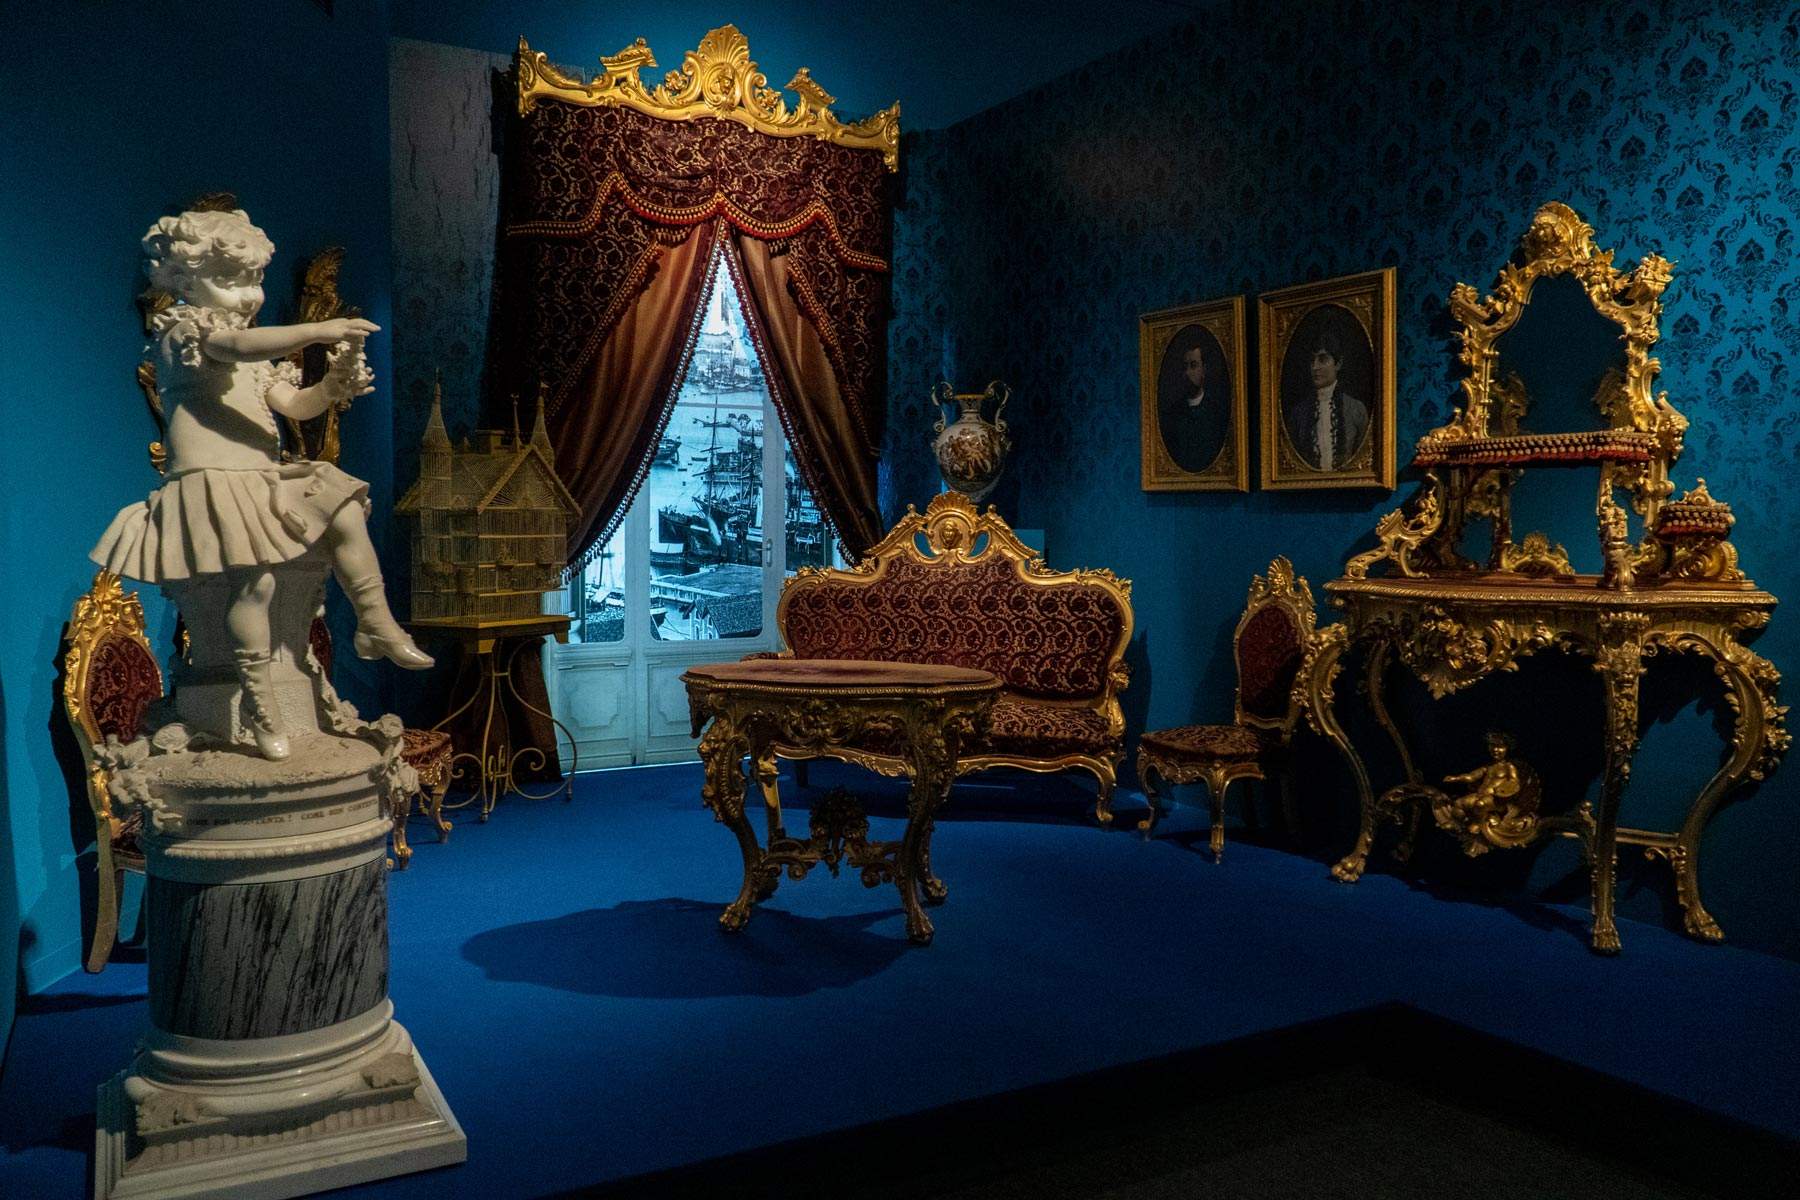 The splendid interiors of nineteenth-century Genoa are on display at the Royal Palace